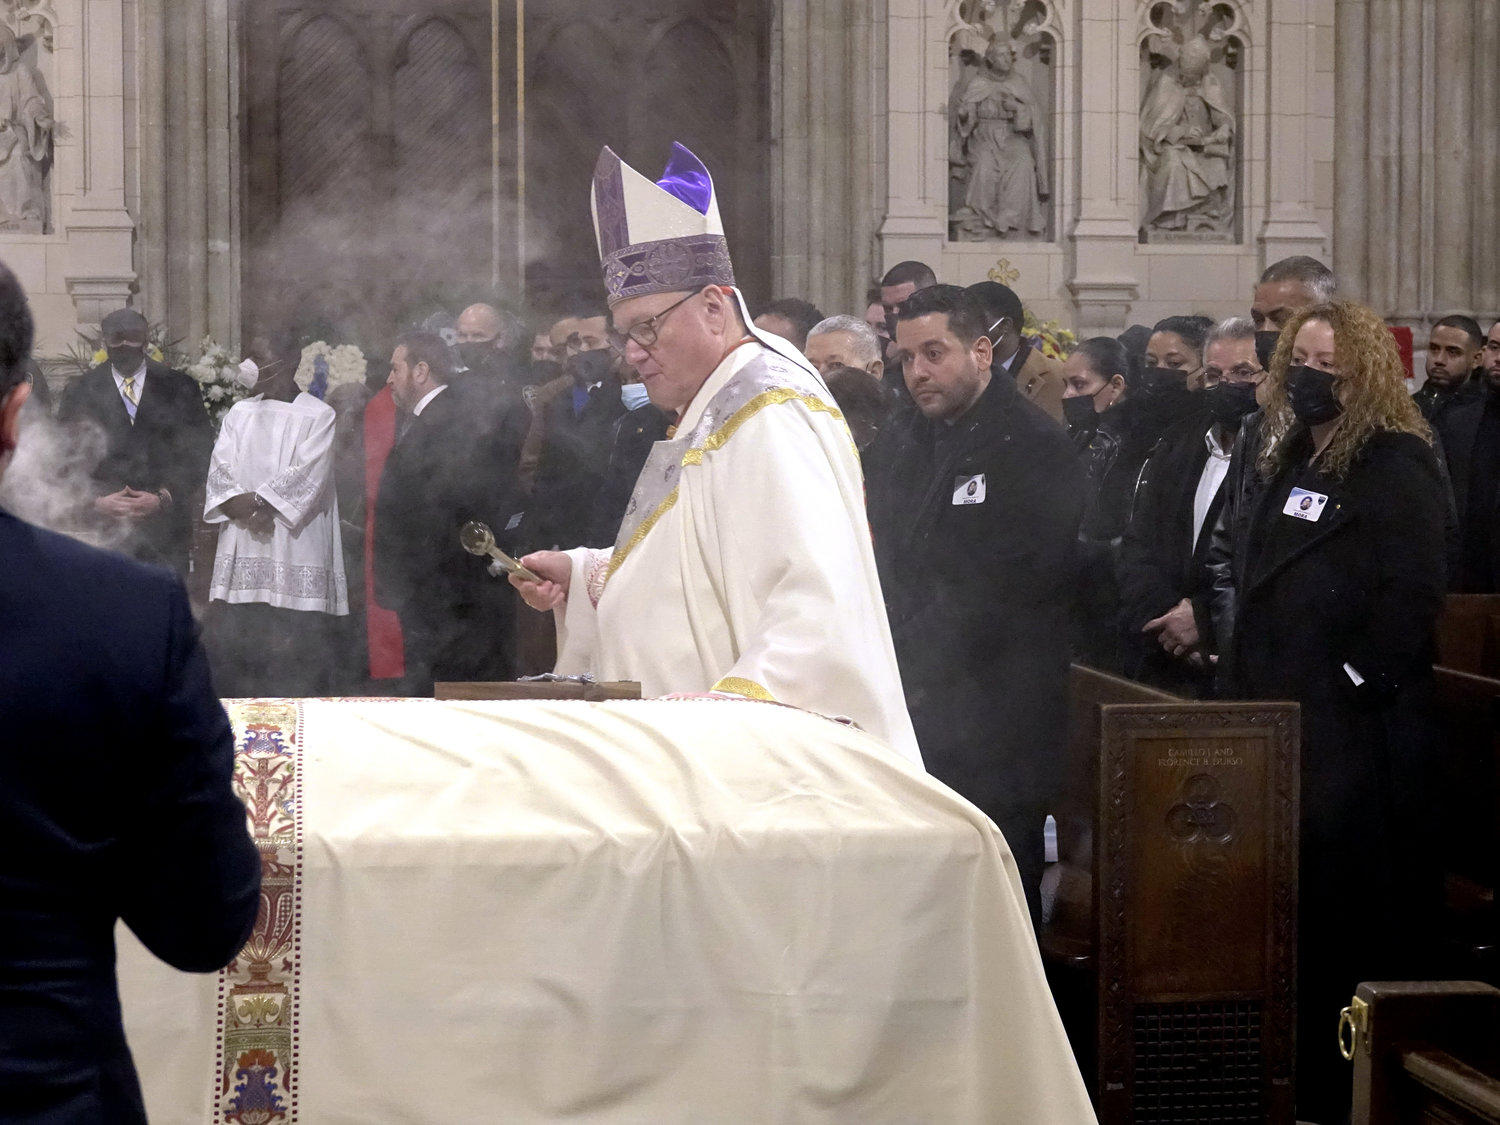 Cardinal Dolan sprinkles holy water on the casket.